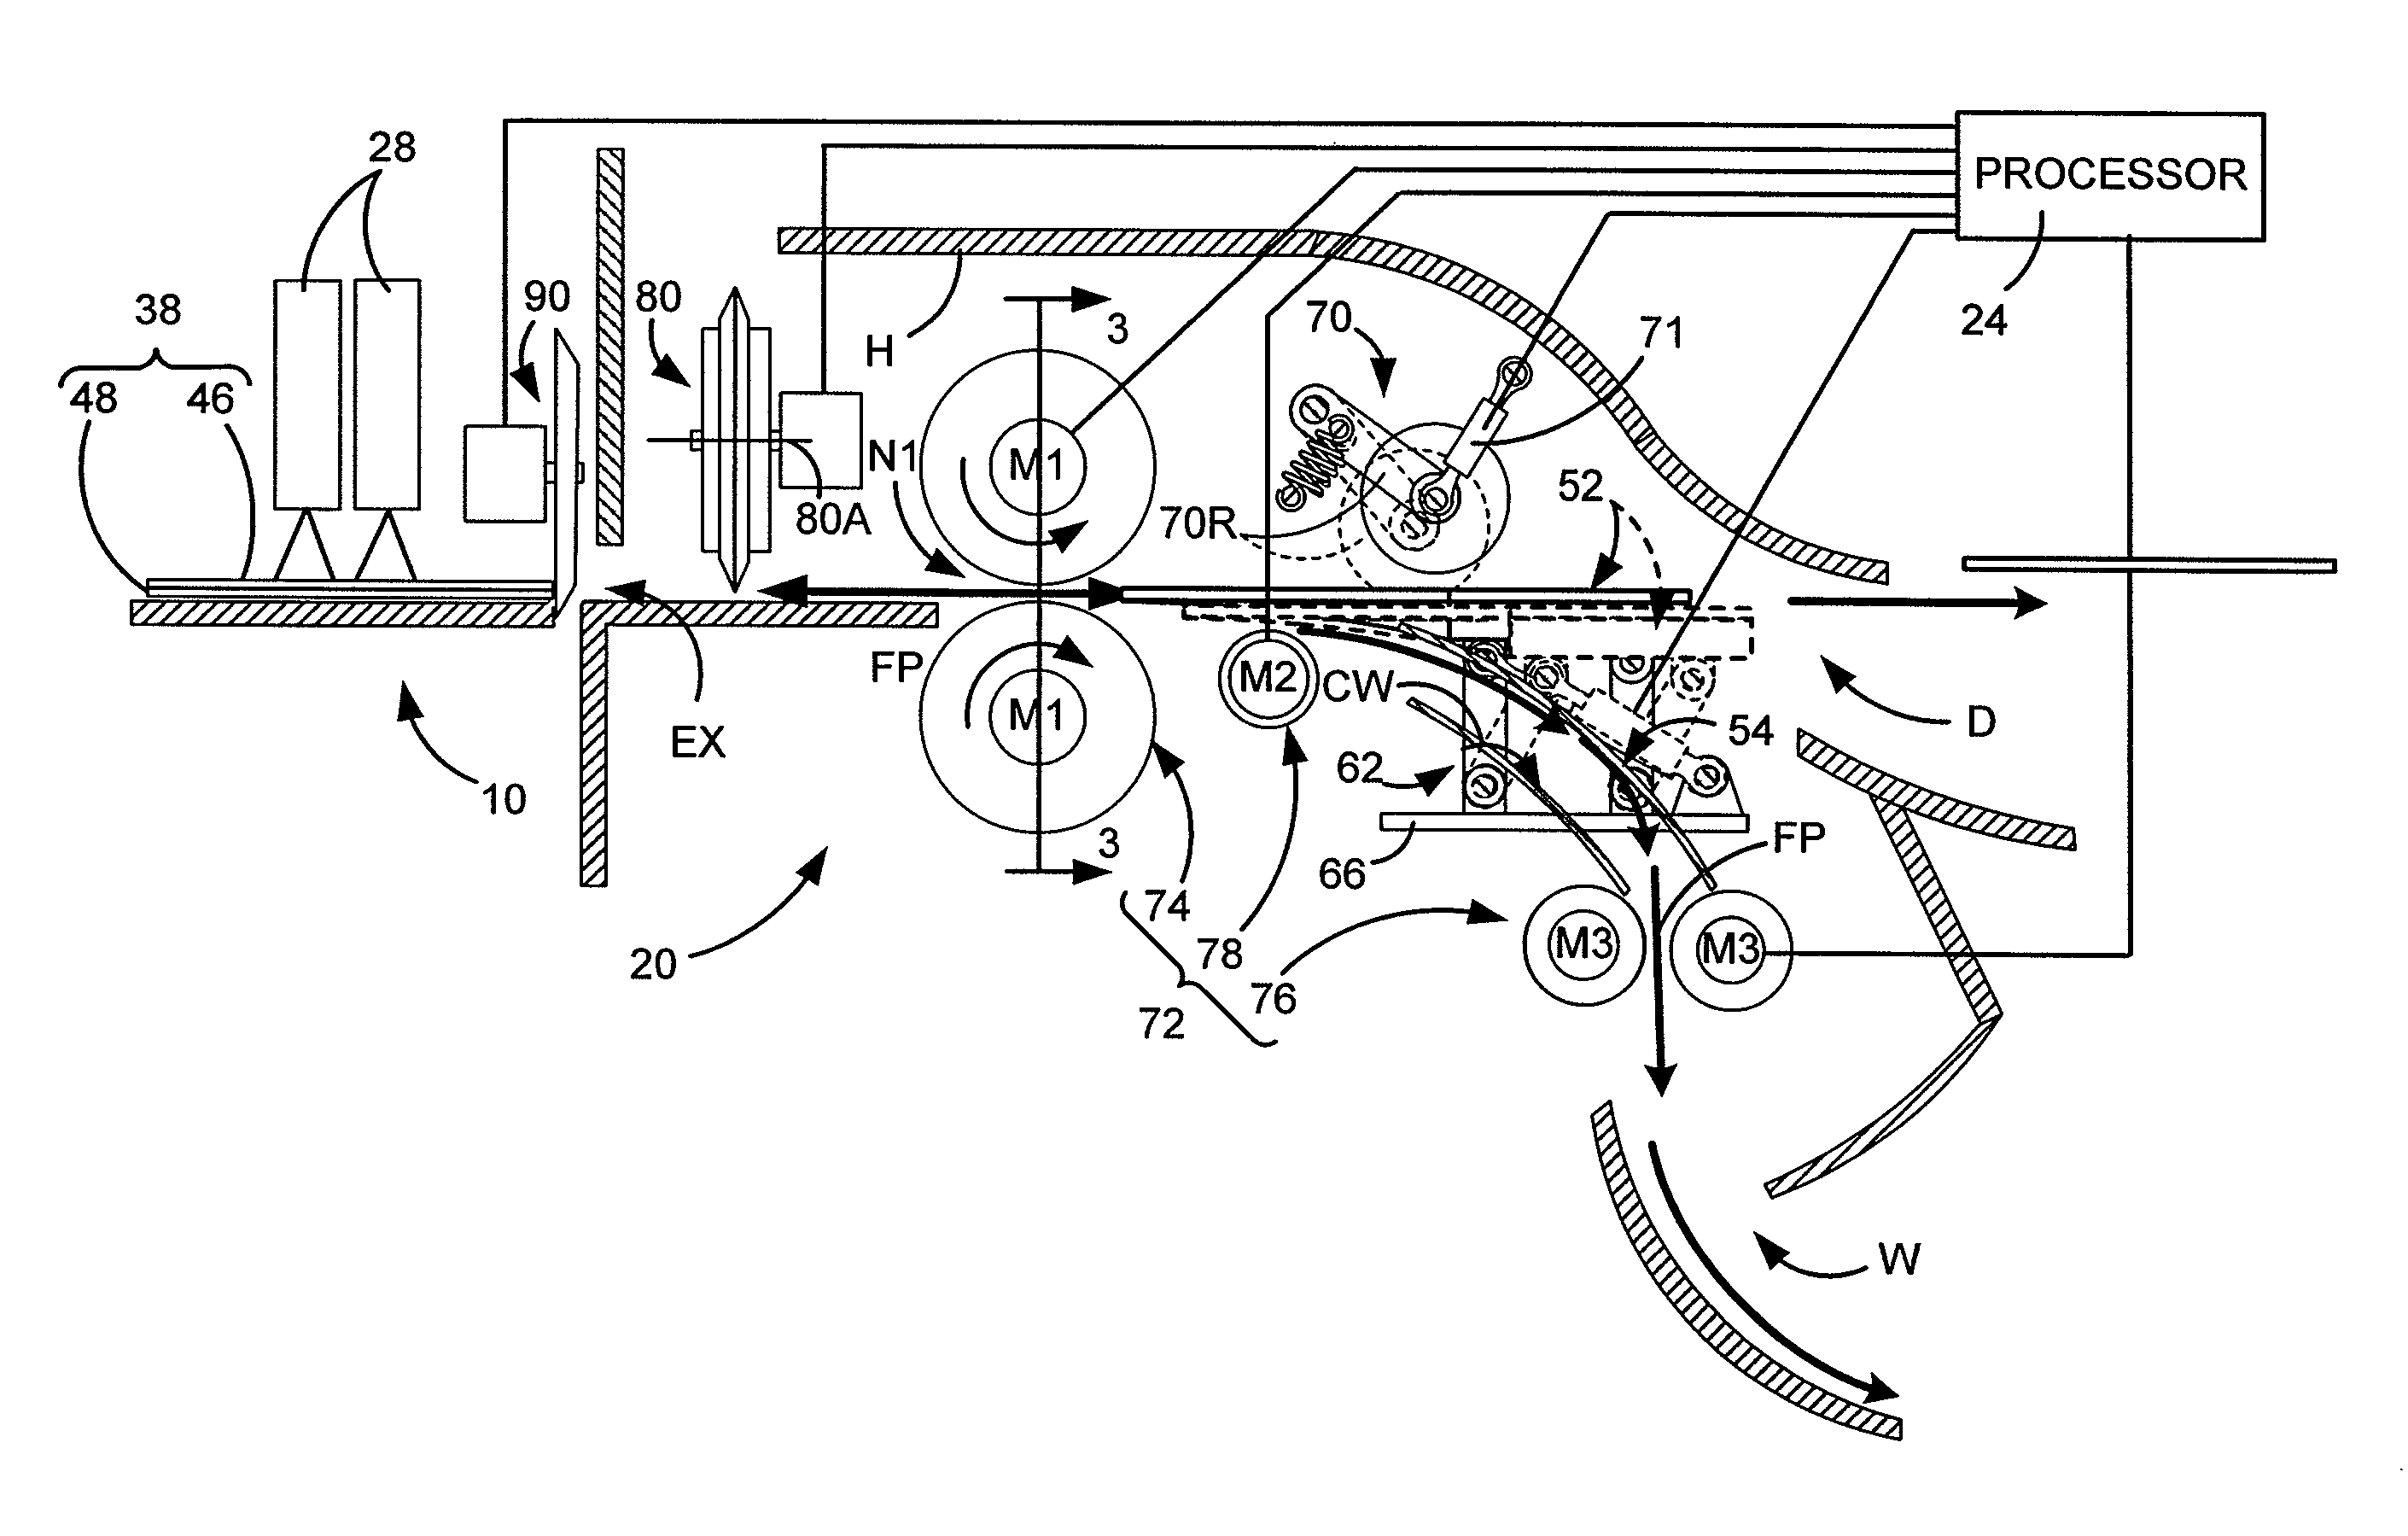 Postage Label Dispensing System Having A Peeler Plow For Dispensing Application Ready and/or Lined Postage Labels